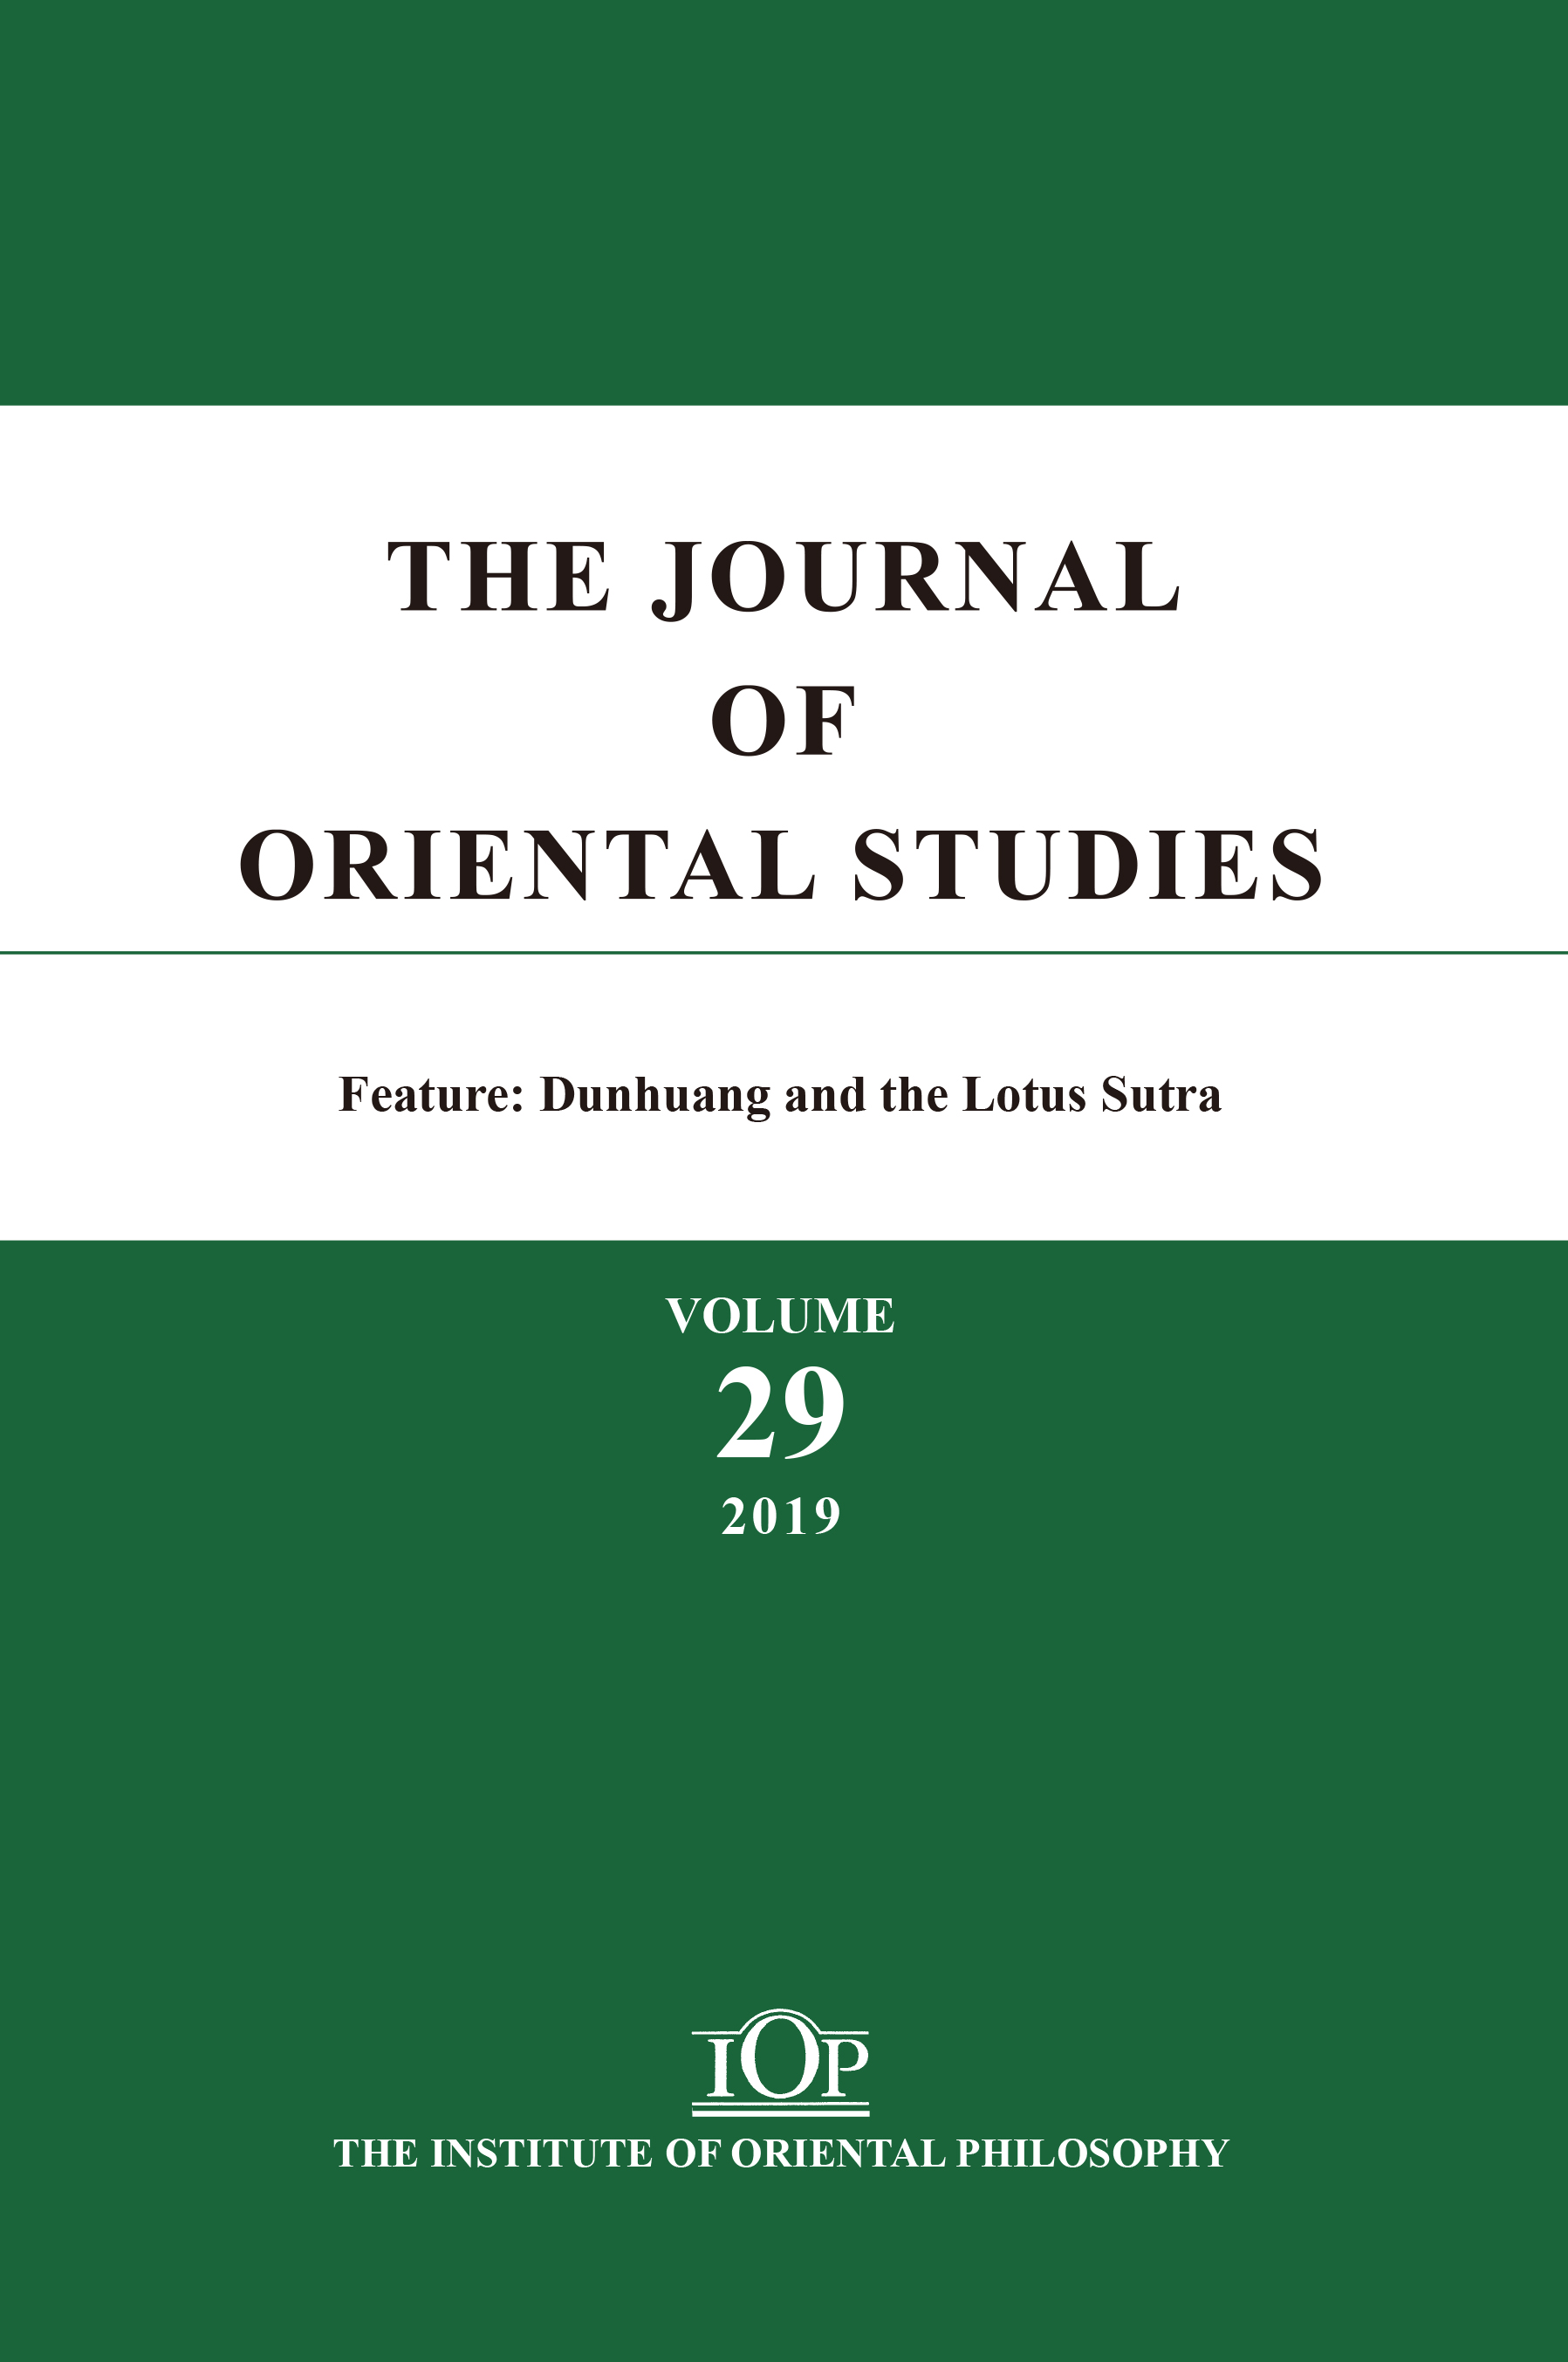 THE JOURNAL OF ORIENTAL STUDIES（Vol. 29） | 東洋哲学研究所